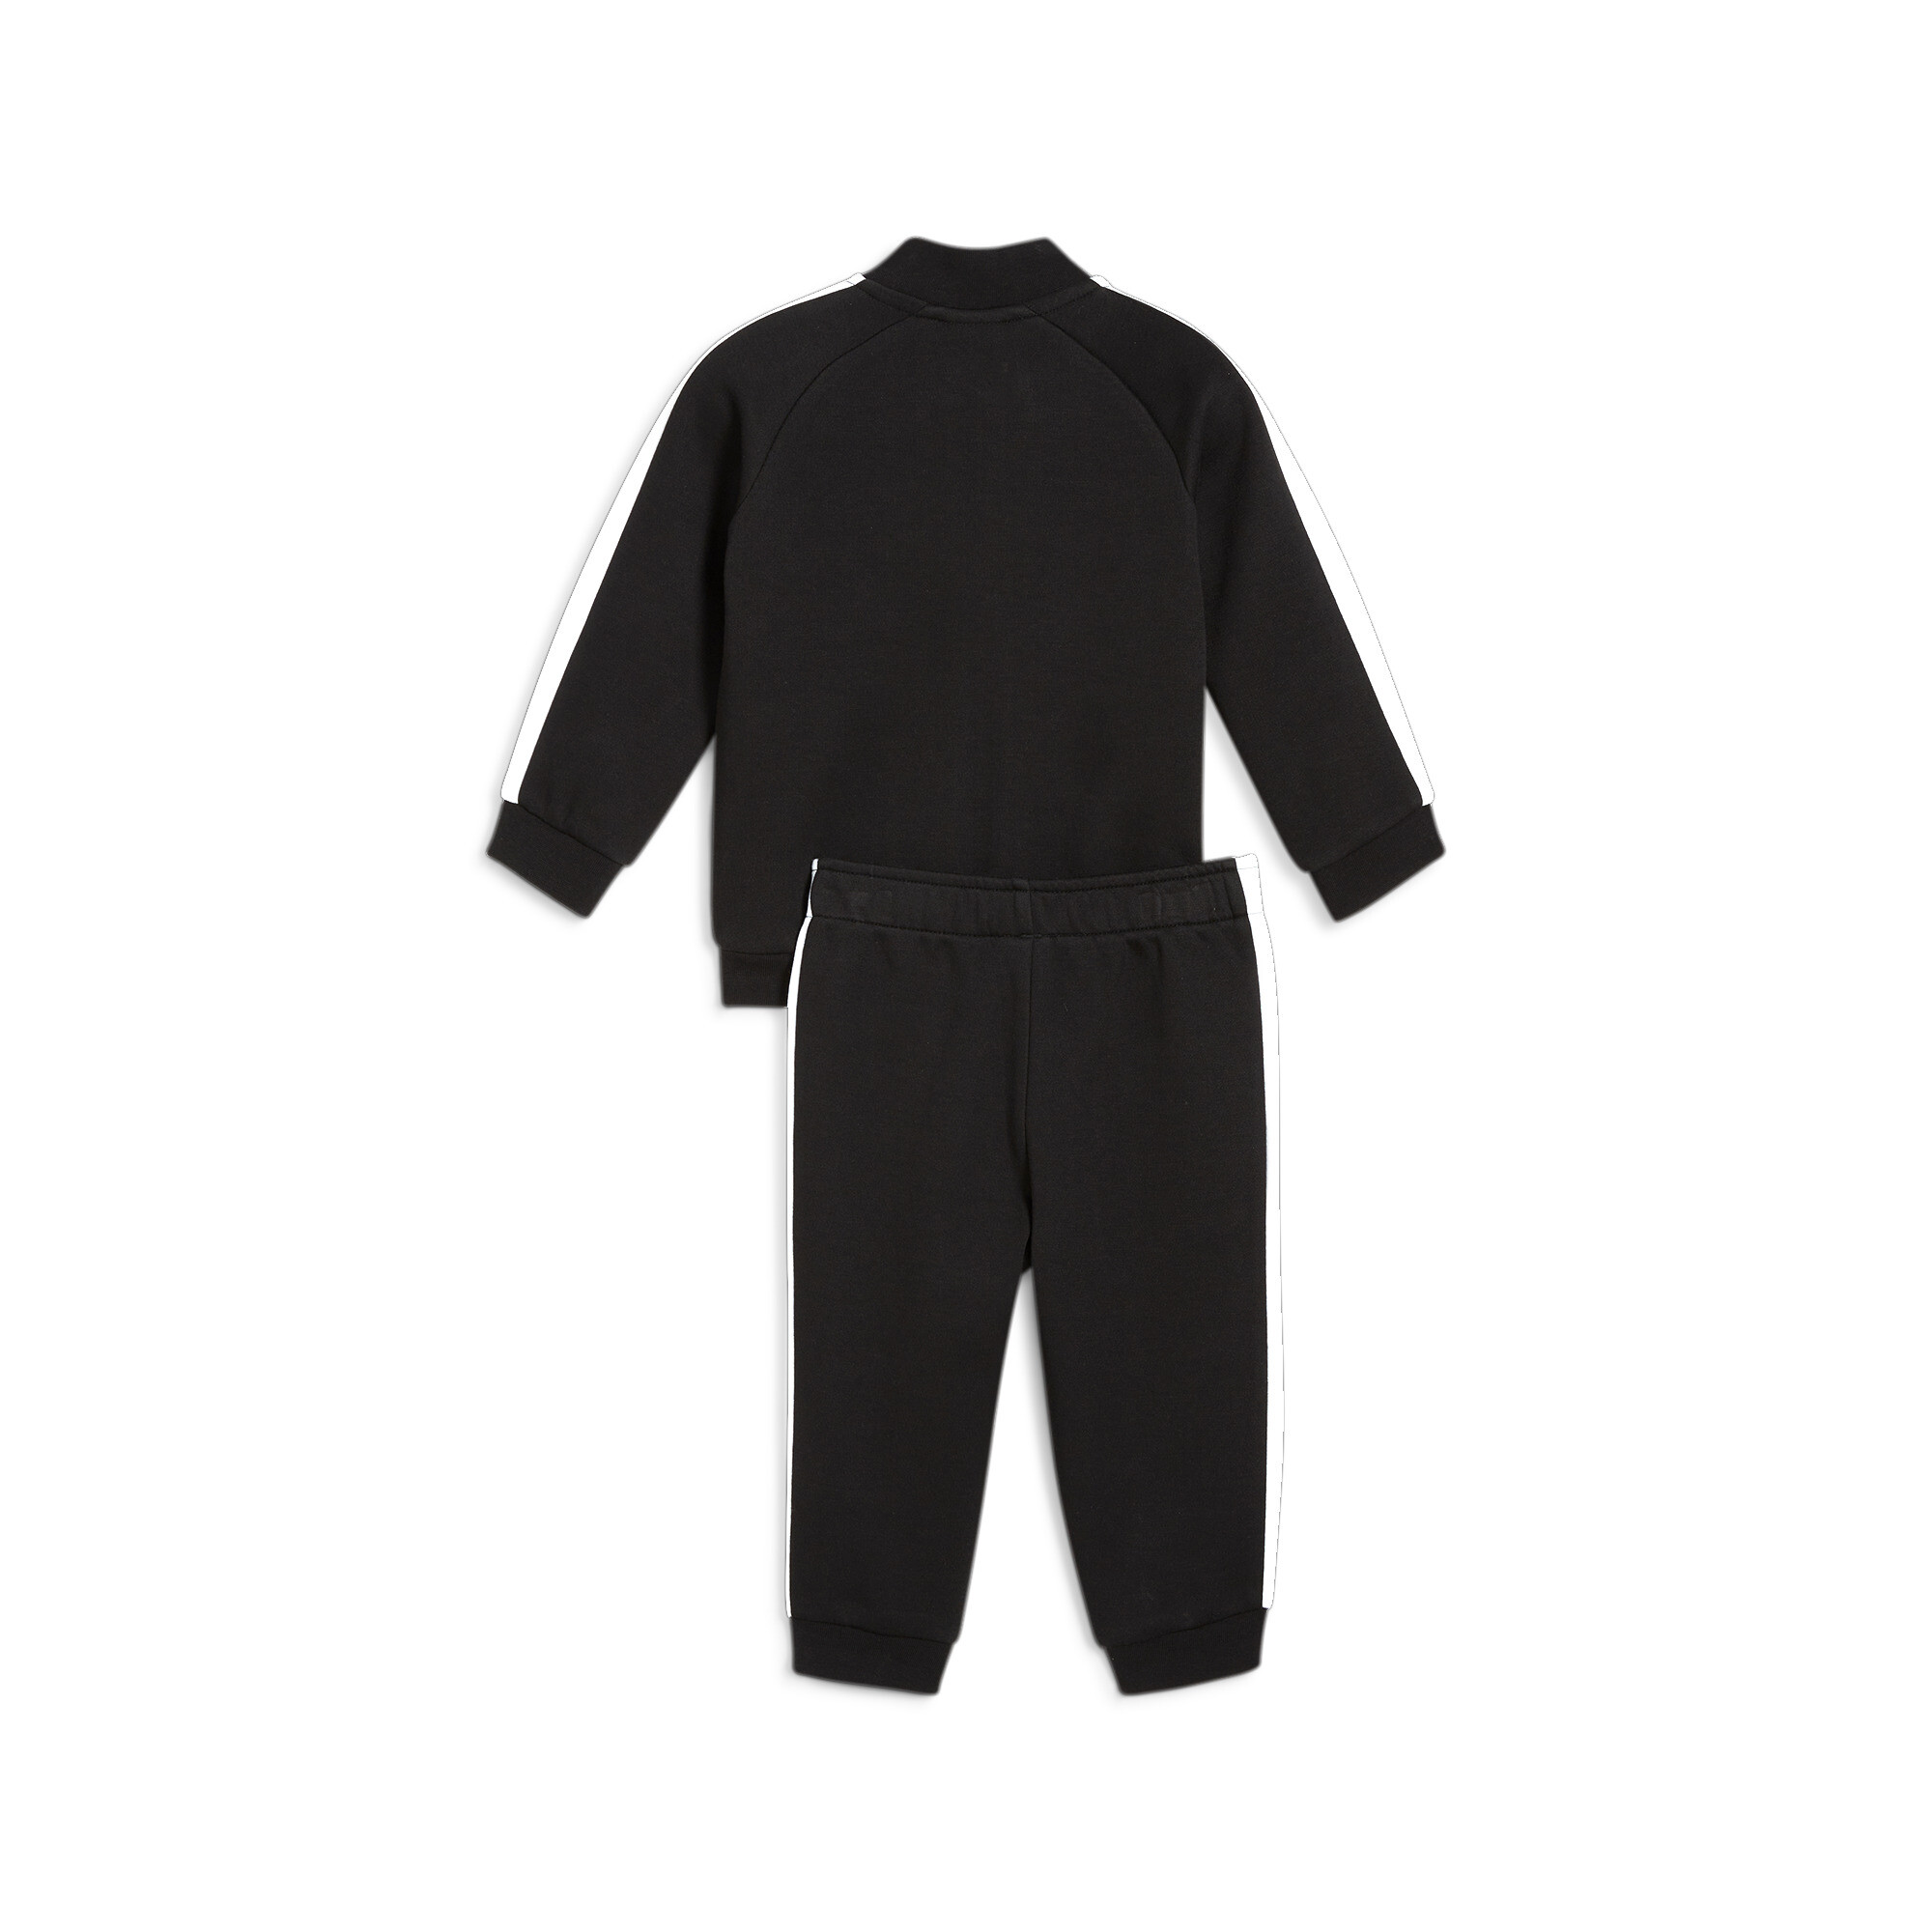 Kids' PUMA MINICATS T7 ICONIC Baby Tracksuit Set In 10 - Black, Size 4-6 Months